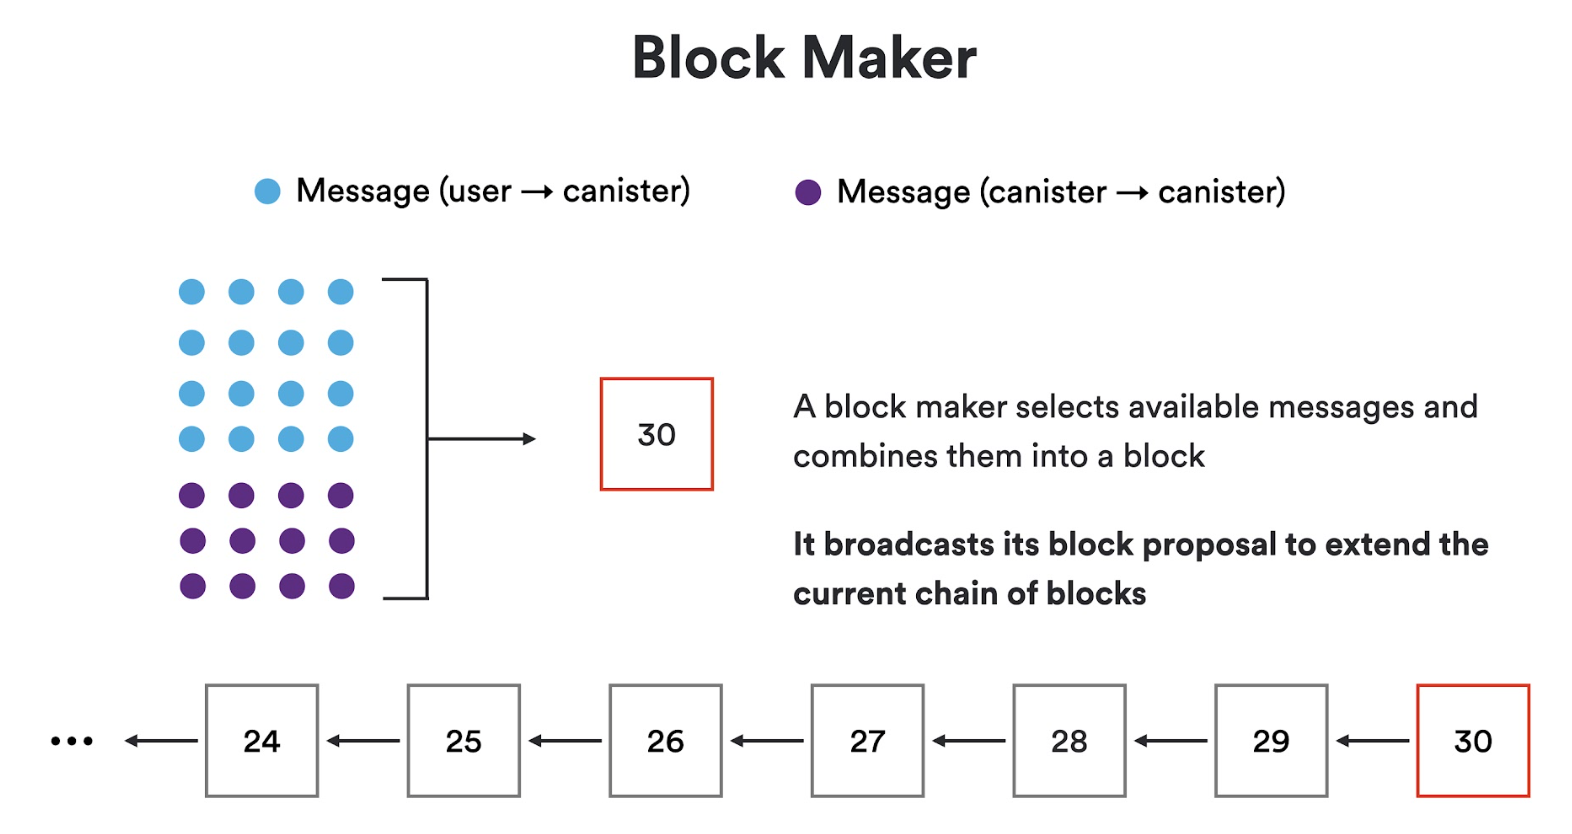 Blockmaker constructs a new block and broadcasts it